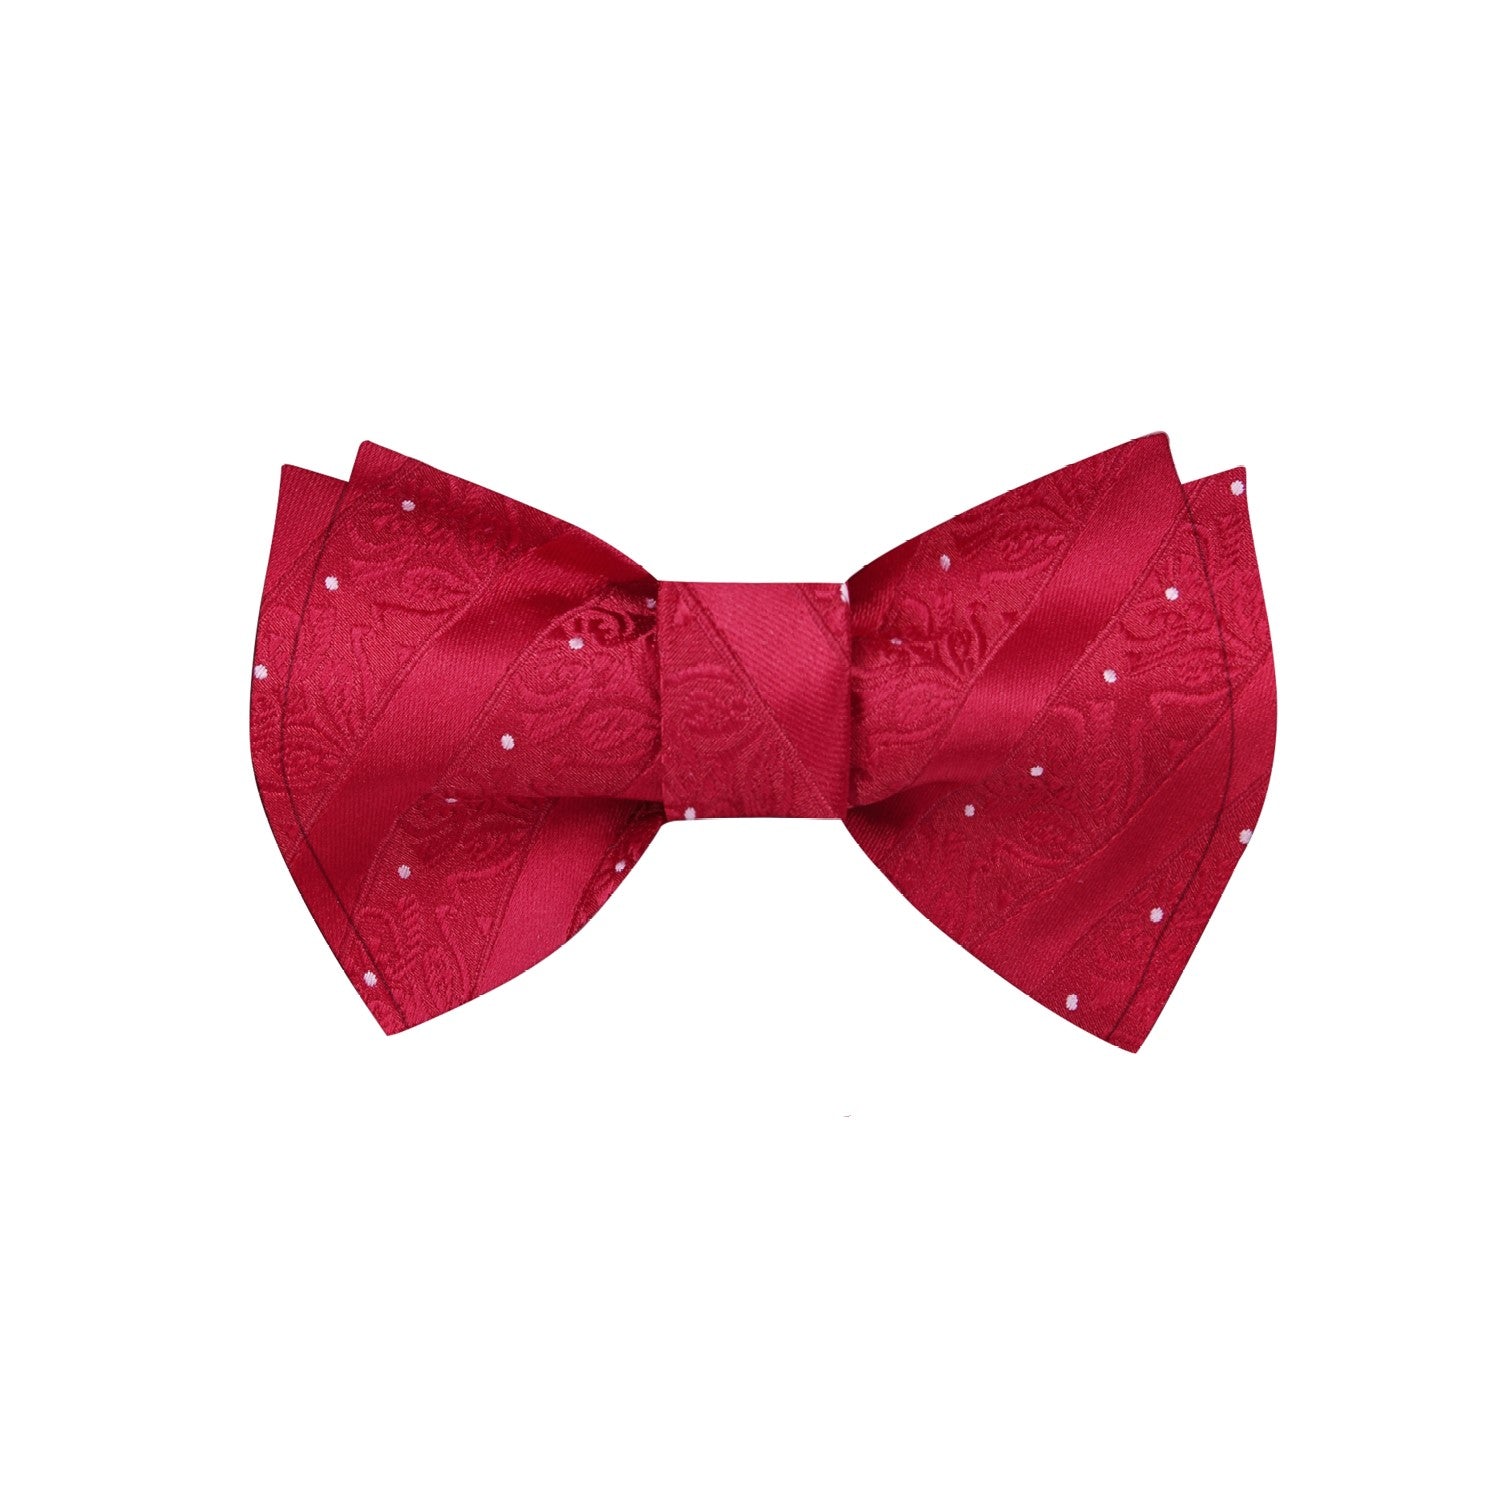 Red Bow Tie with Floral Texture Bow Tie